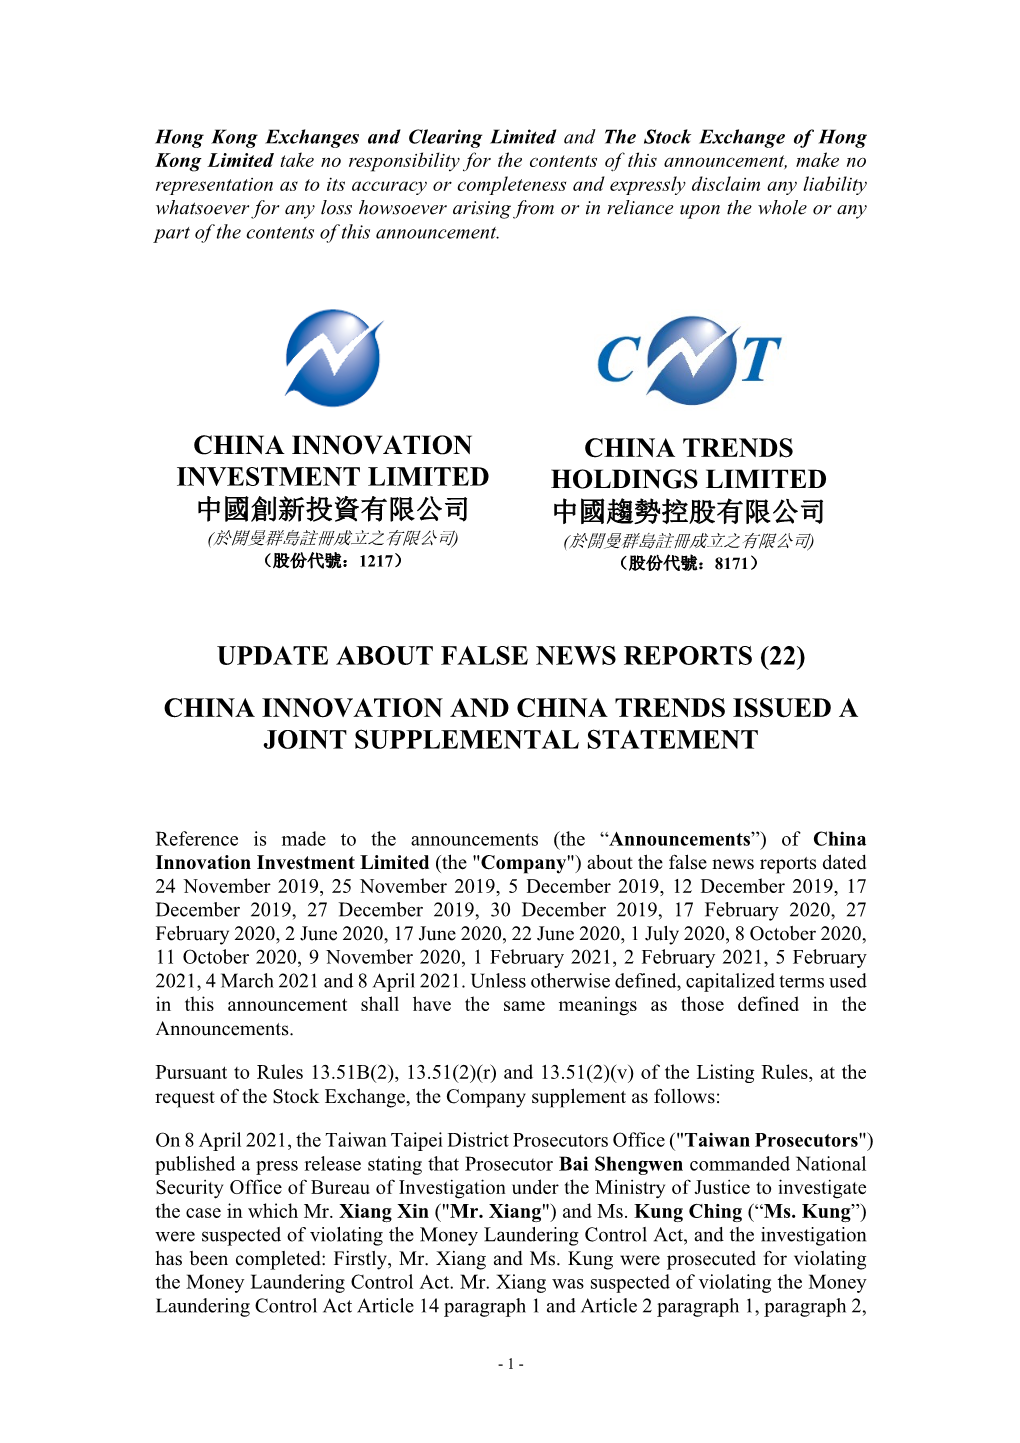 Update About False News Reports (22) China Innovation and China Trends Issued a Joint Supplemental Statement